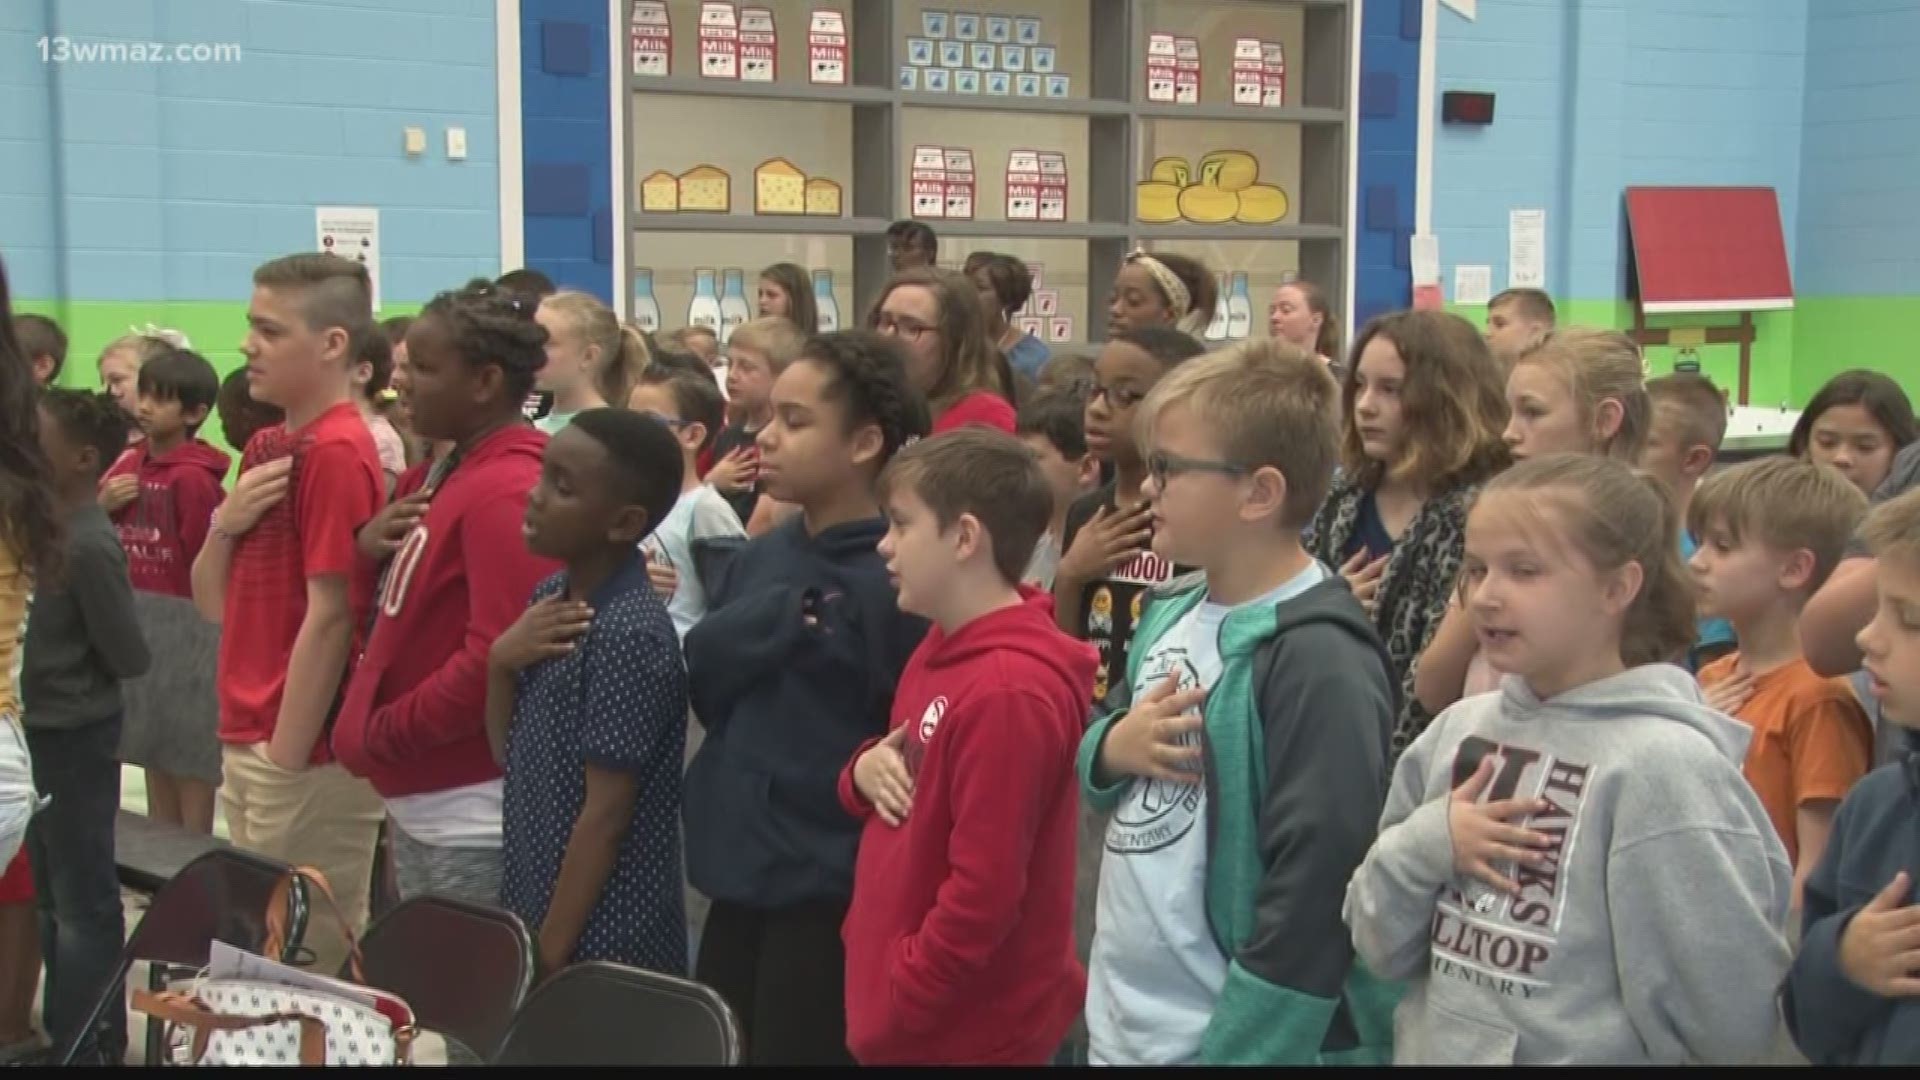 Hilltop Elementary School received a Military Flagship Award for their dedication to providing unique opportunities for military families, which makes them our 'School of the Week.'